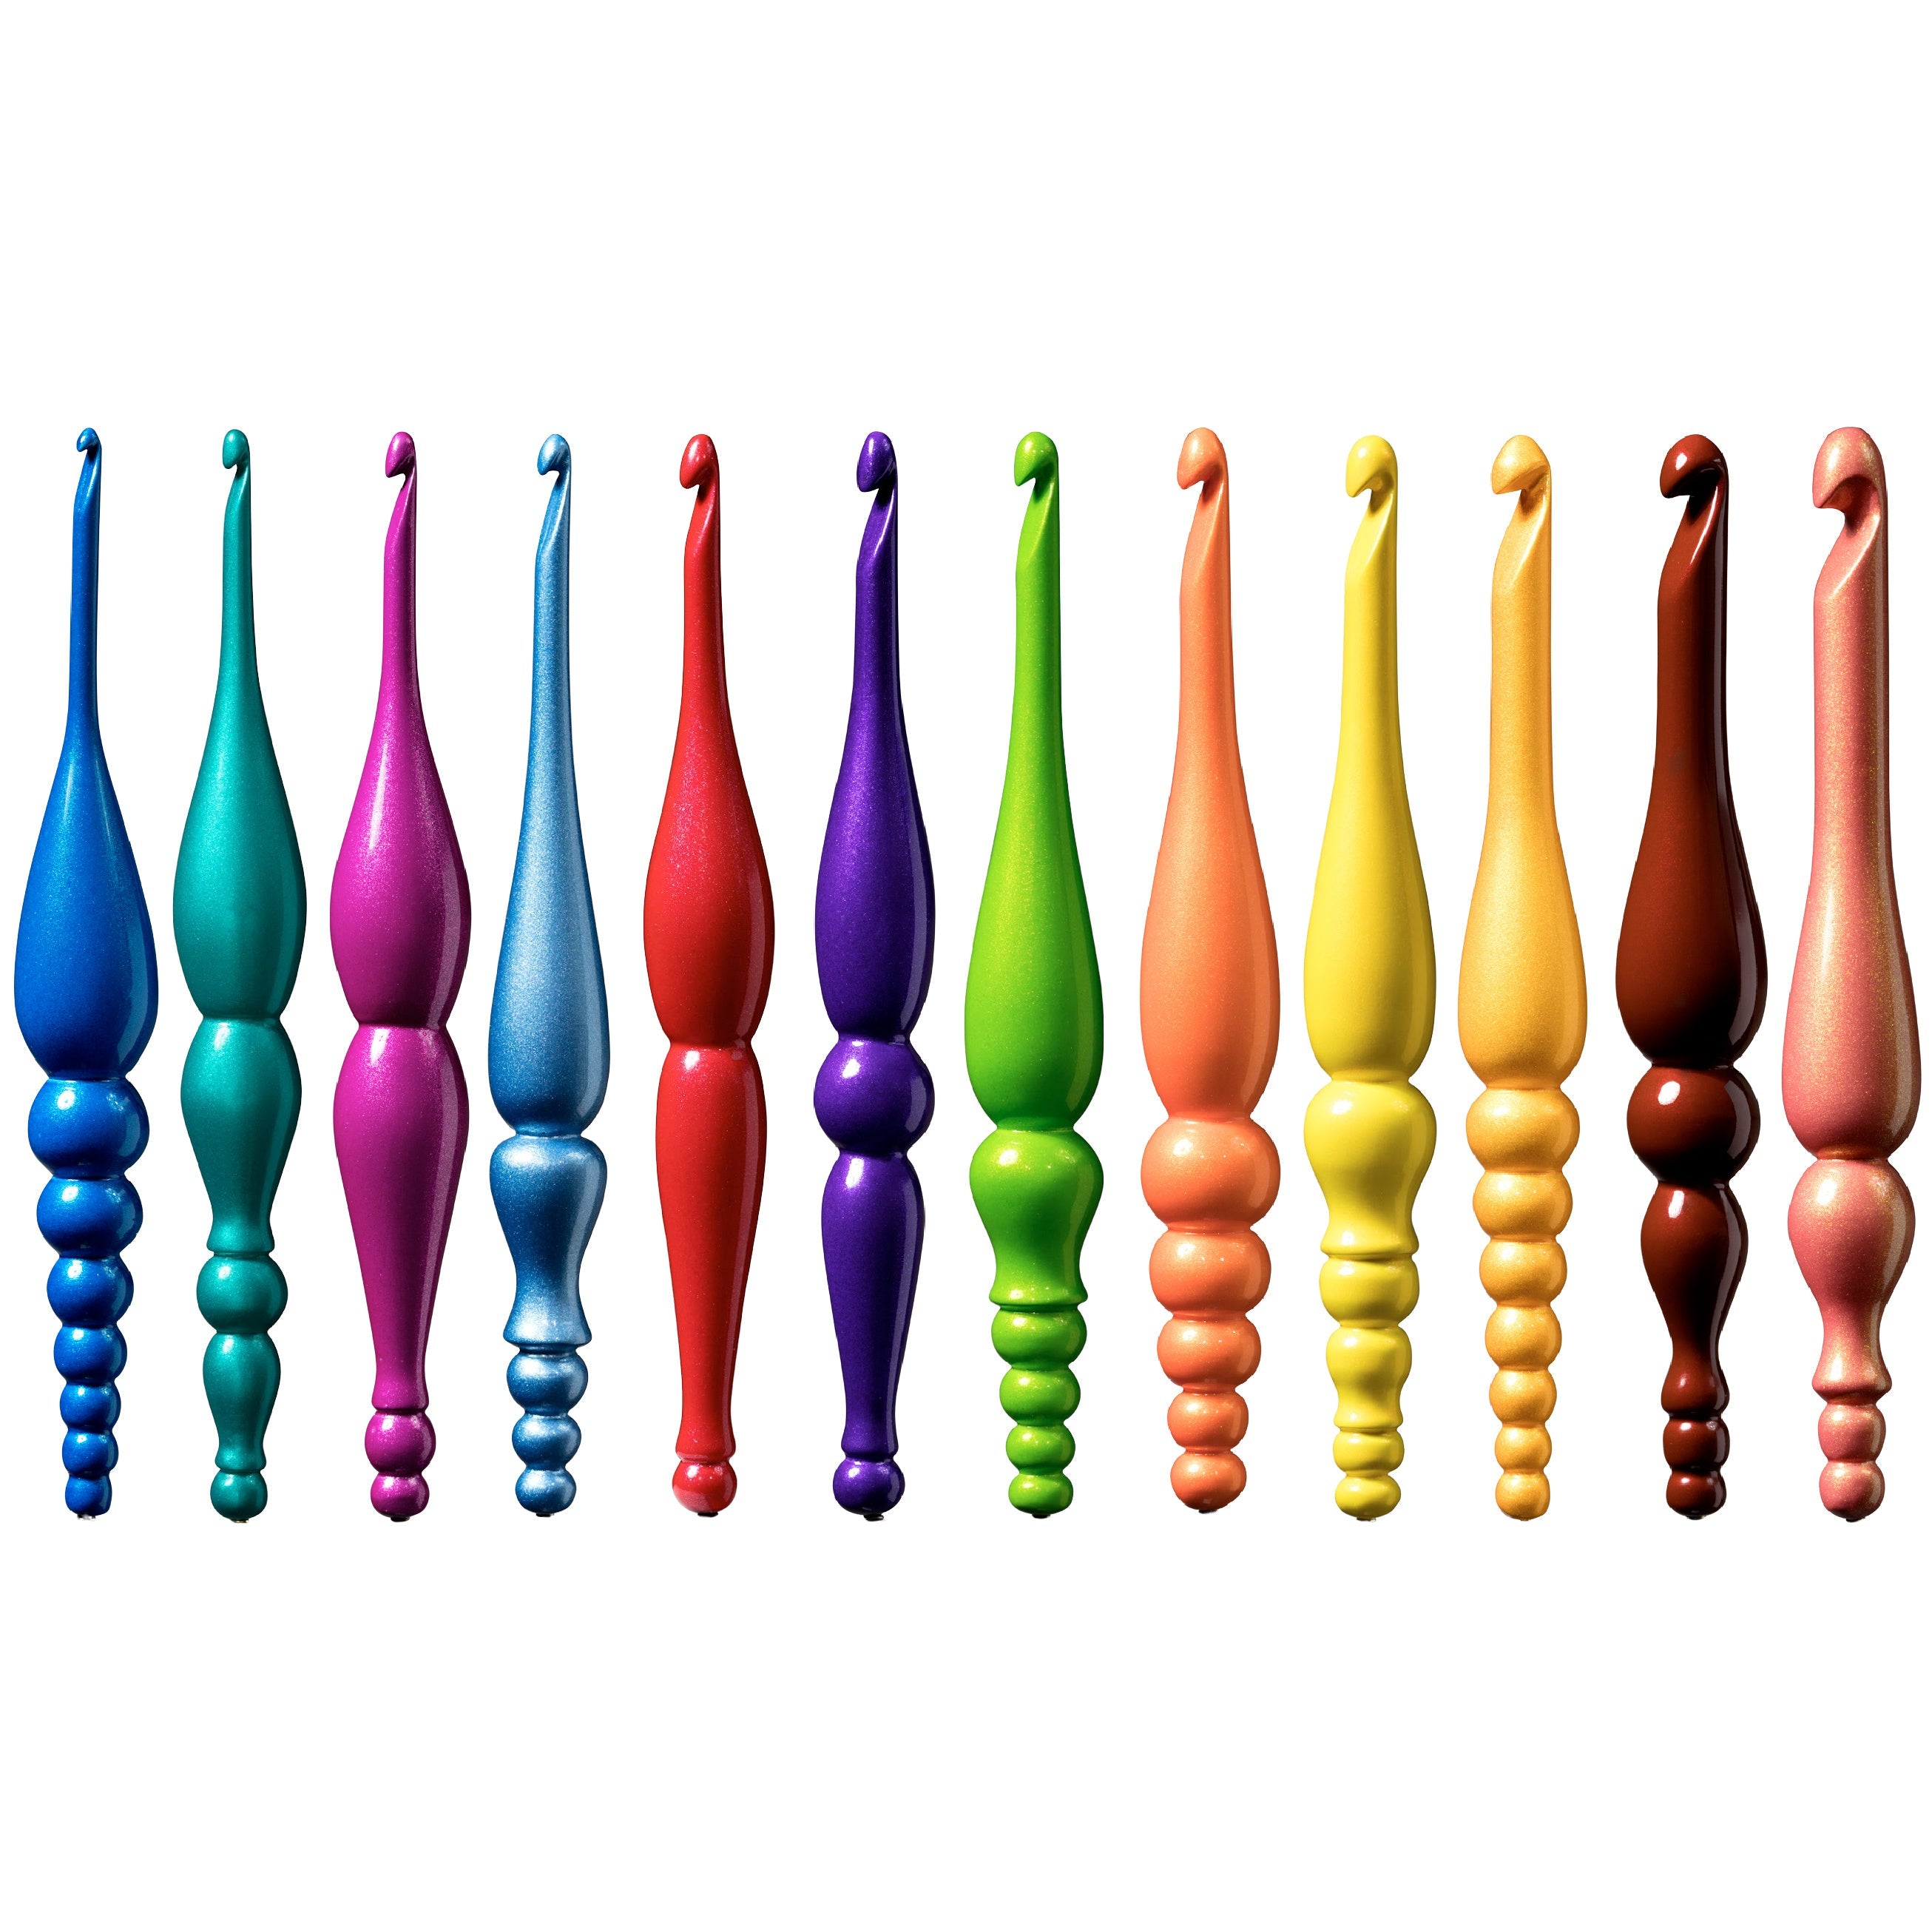 Candy Shop Crochet Hooks: Choose from Sizes F, G, H and I – FurlsCrochet